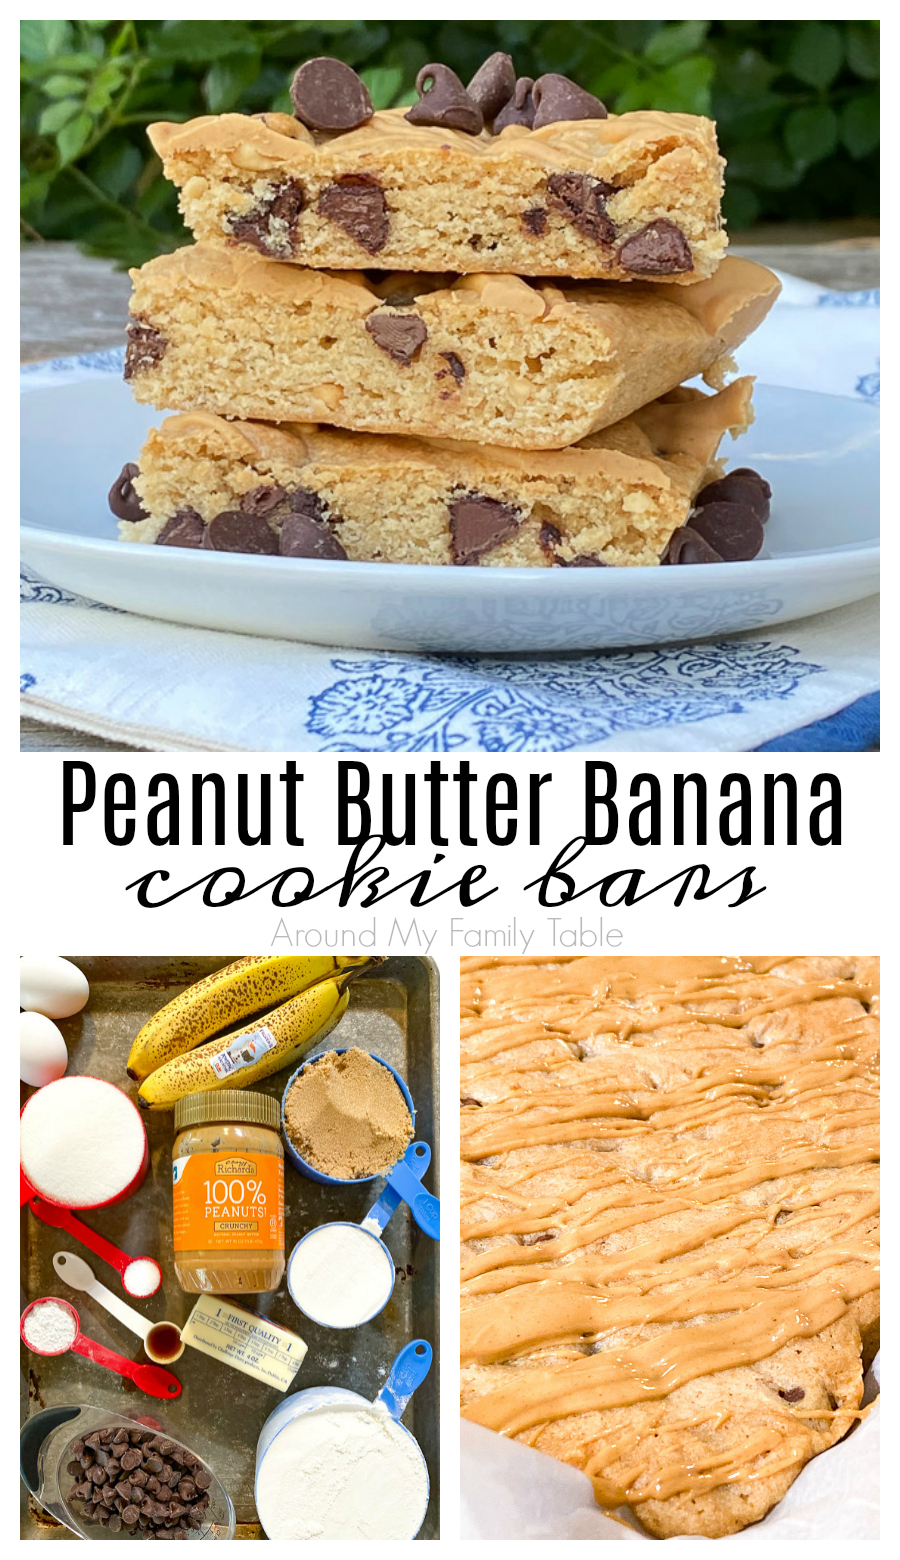 Peanut Butter Banana Cookie Bars are the perfect blend of peanut butter, banana, and chocolate chips in a moist, cake-like cookie bar made with pantry staples.  It's the perfect after school snack or dessert. via @slingmama